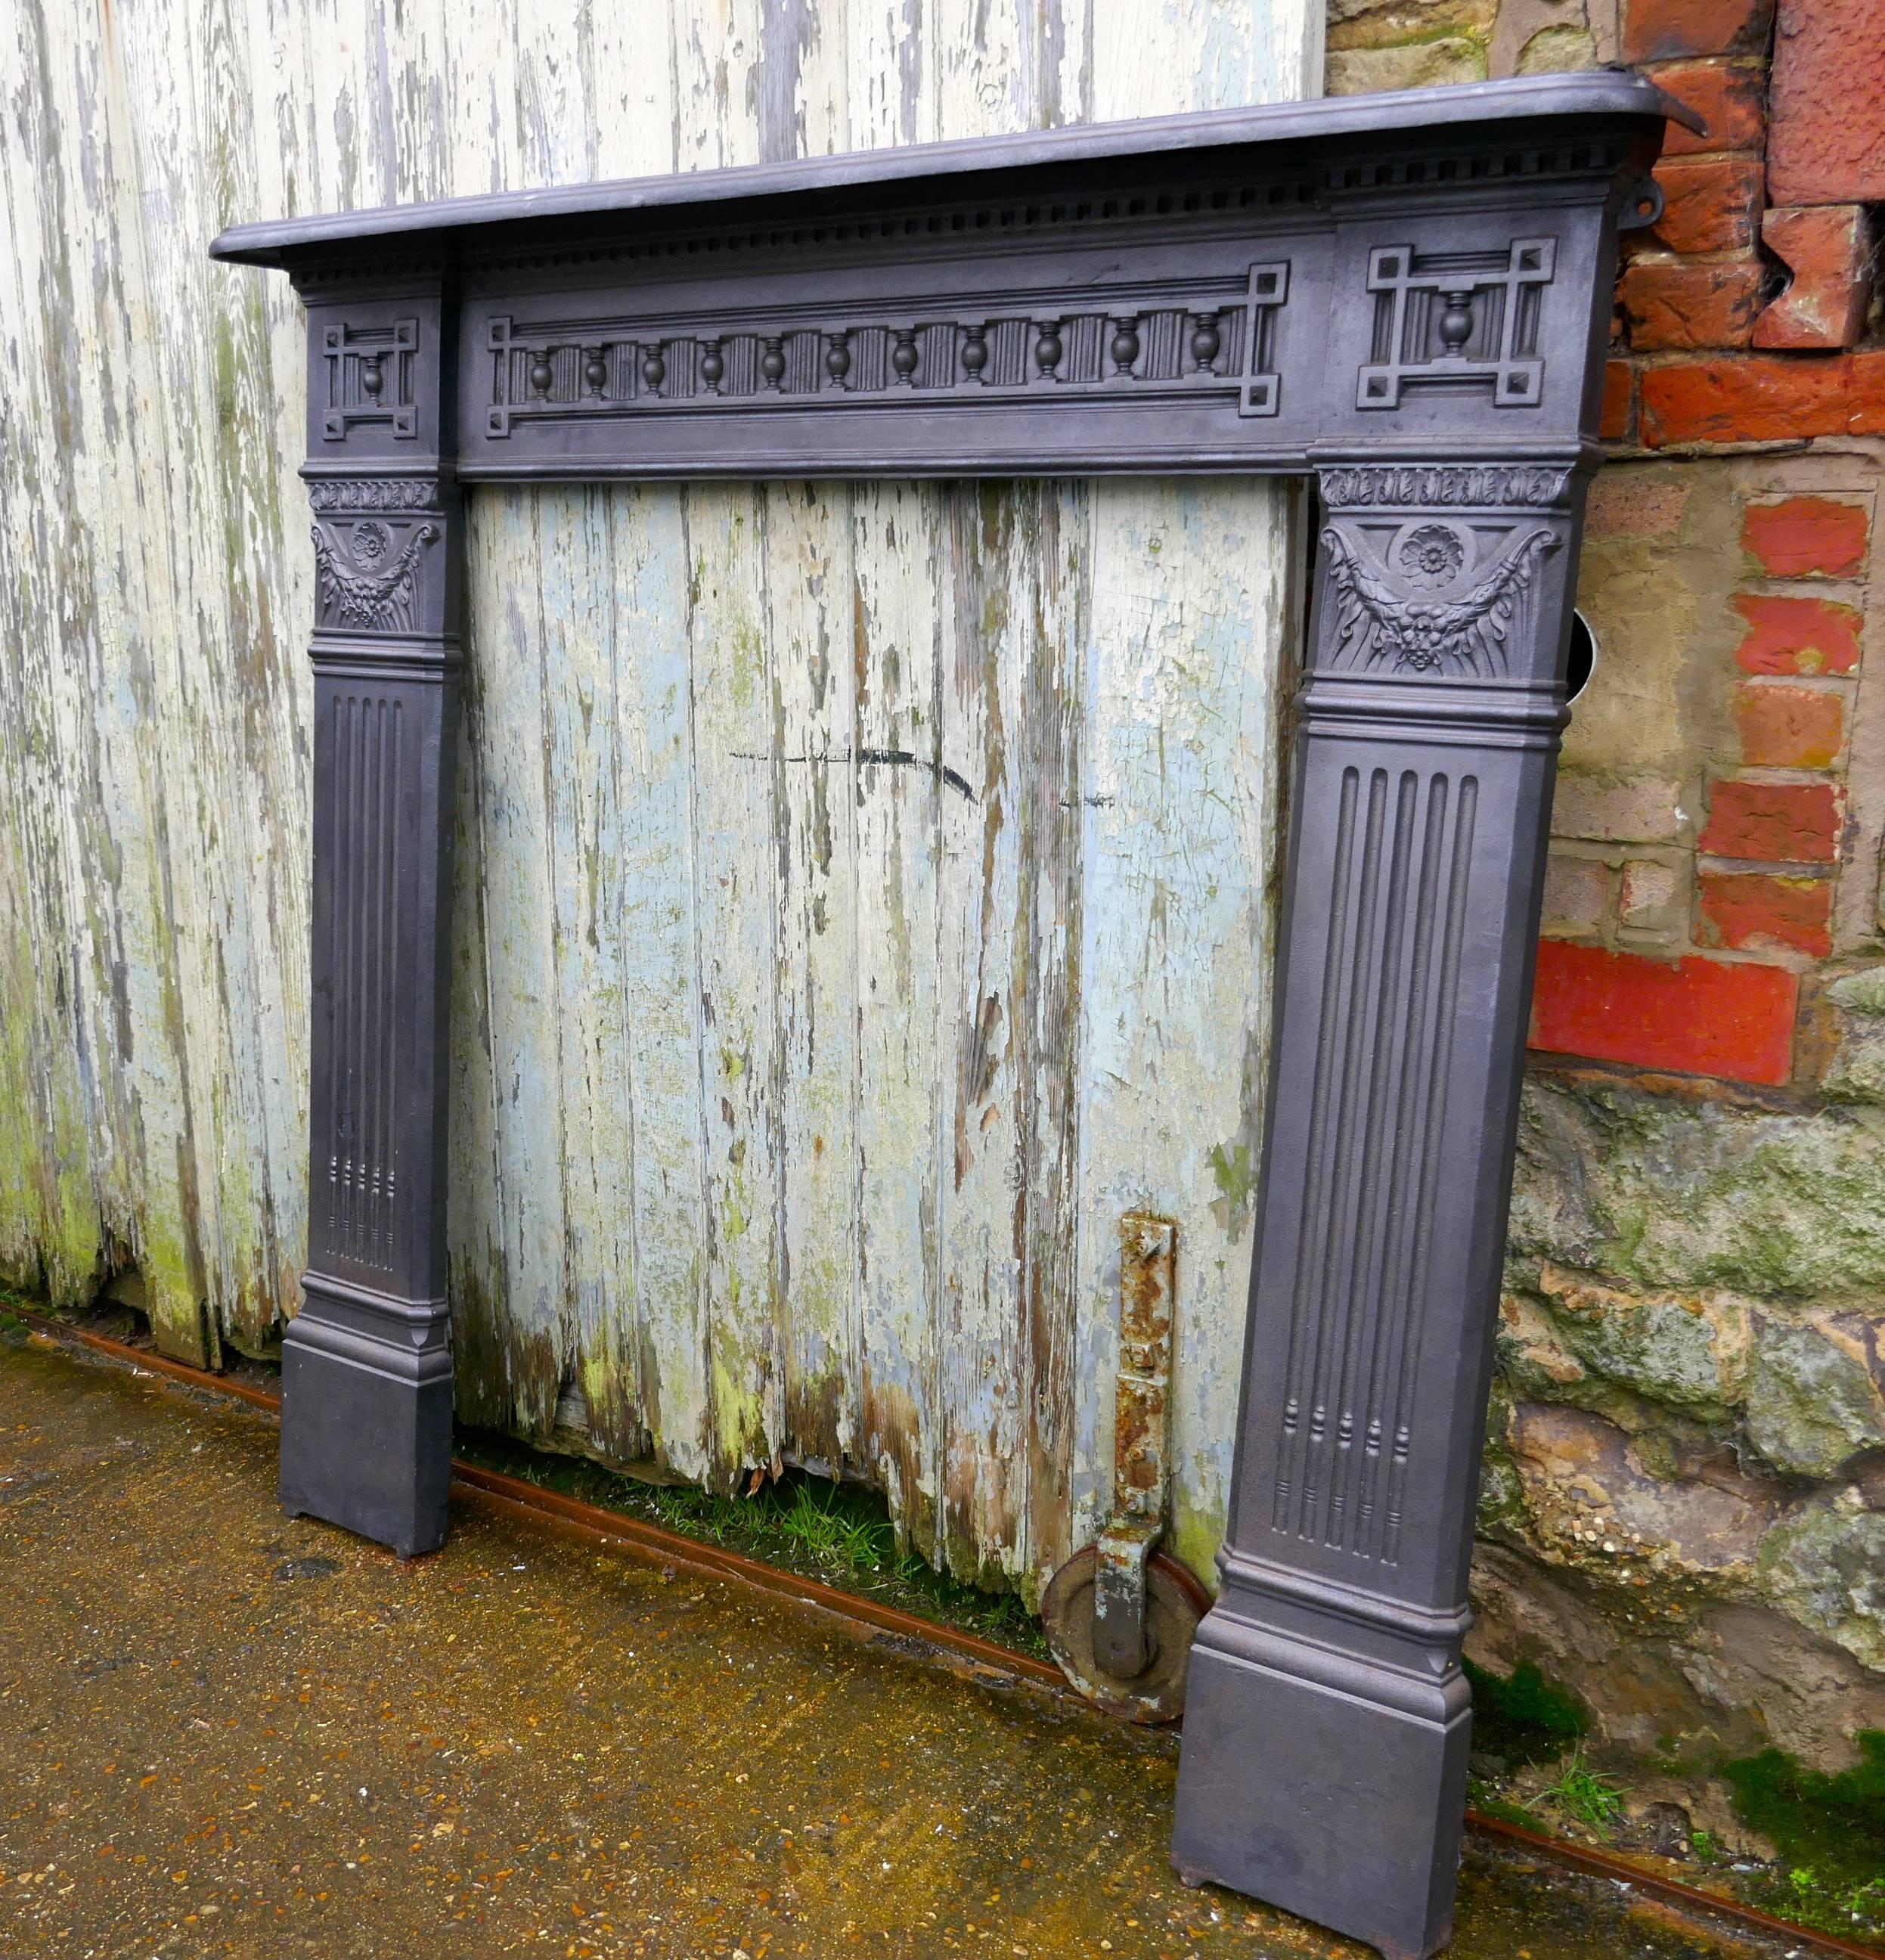 Large 19th Century Cast Iron Fire Place

This 19th Century FirePlace was rescued from a Victorian House during extensive renovations

The Fireplace is Cast Iron, the side supports are fluted and it is decorated beneath the mantlepiece
The Fire place